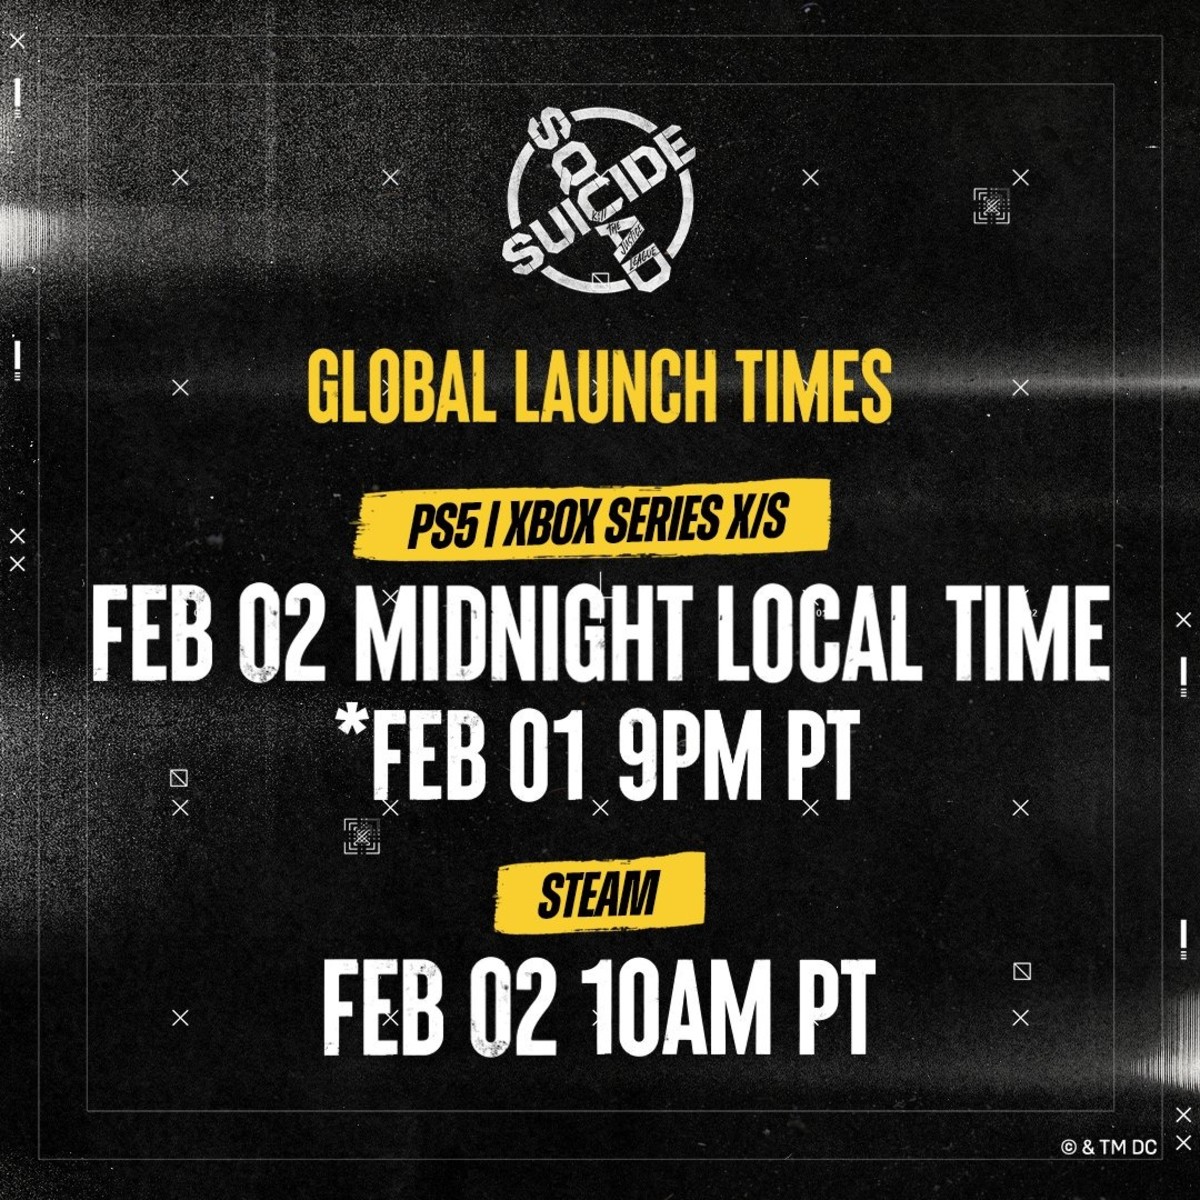 Global launch times.